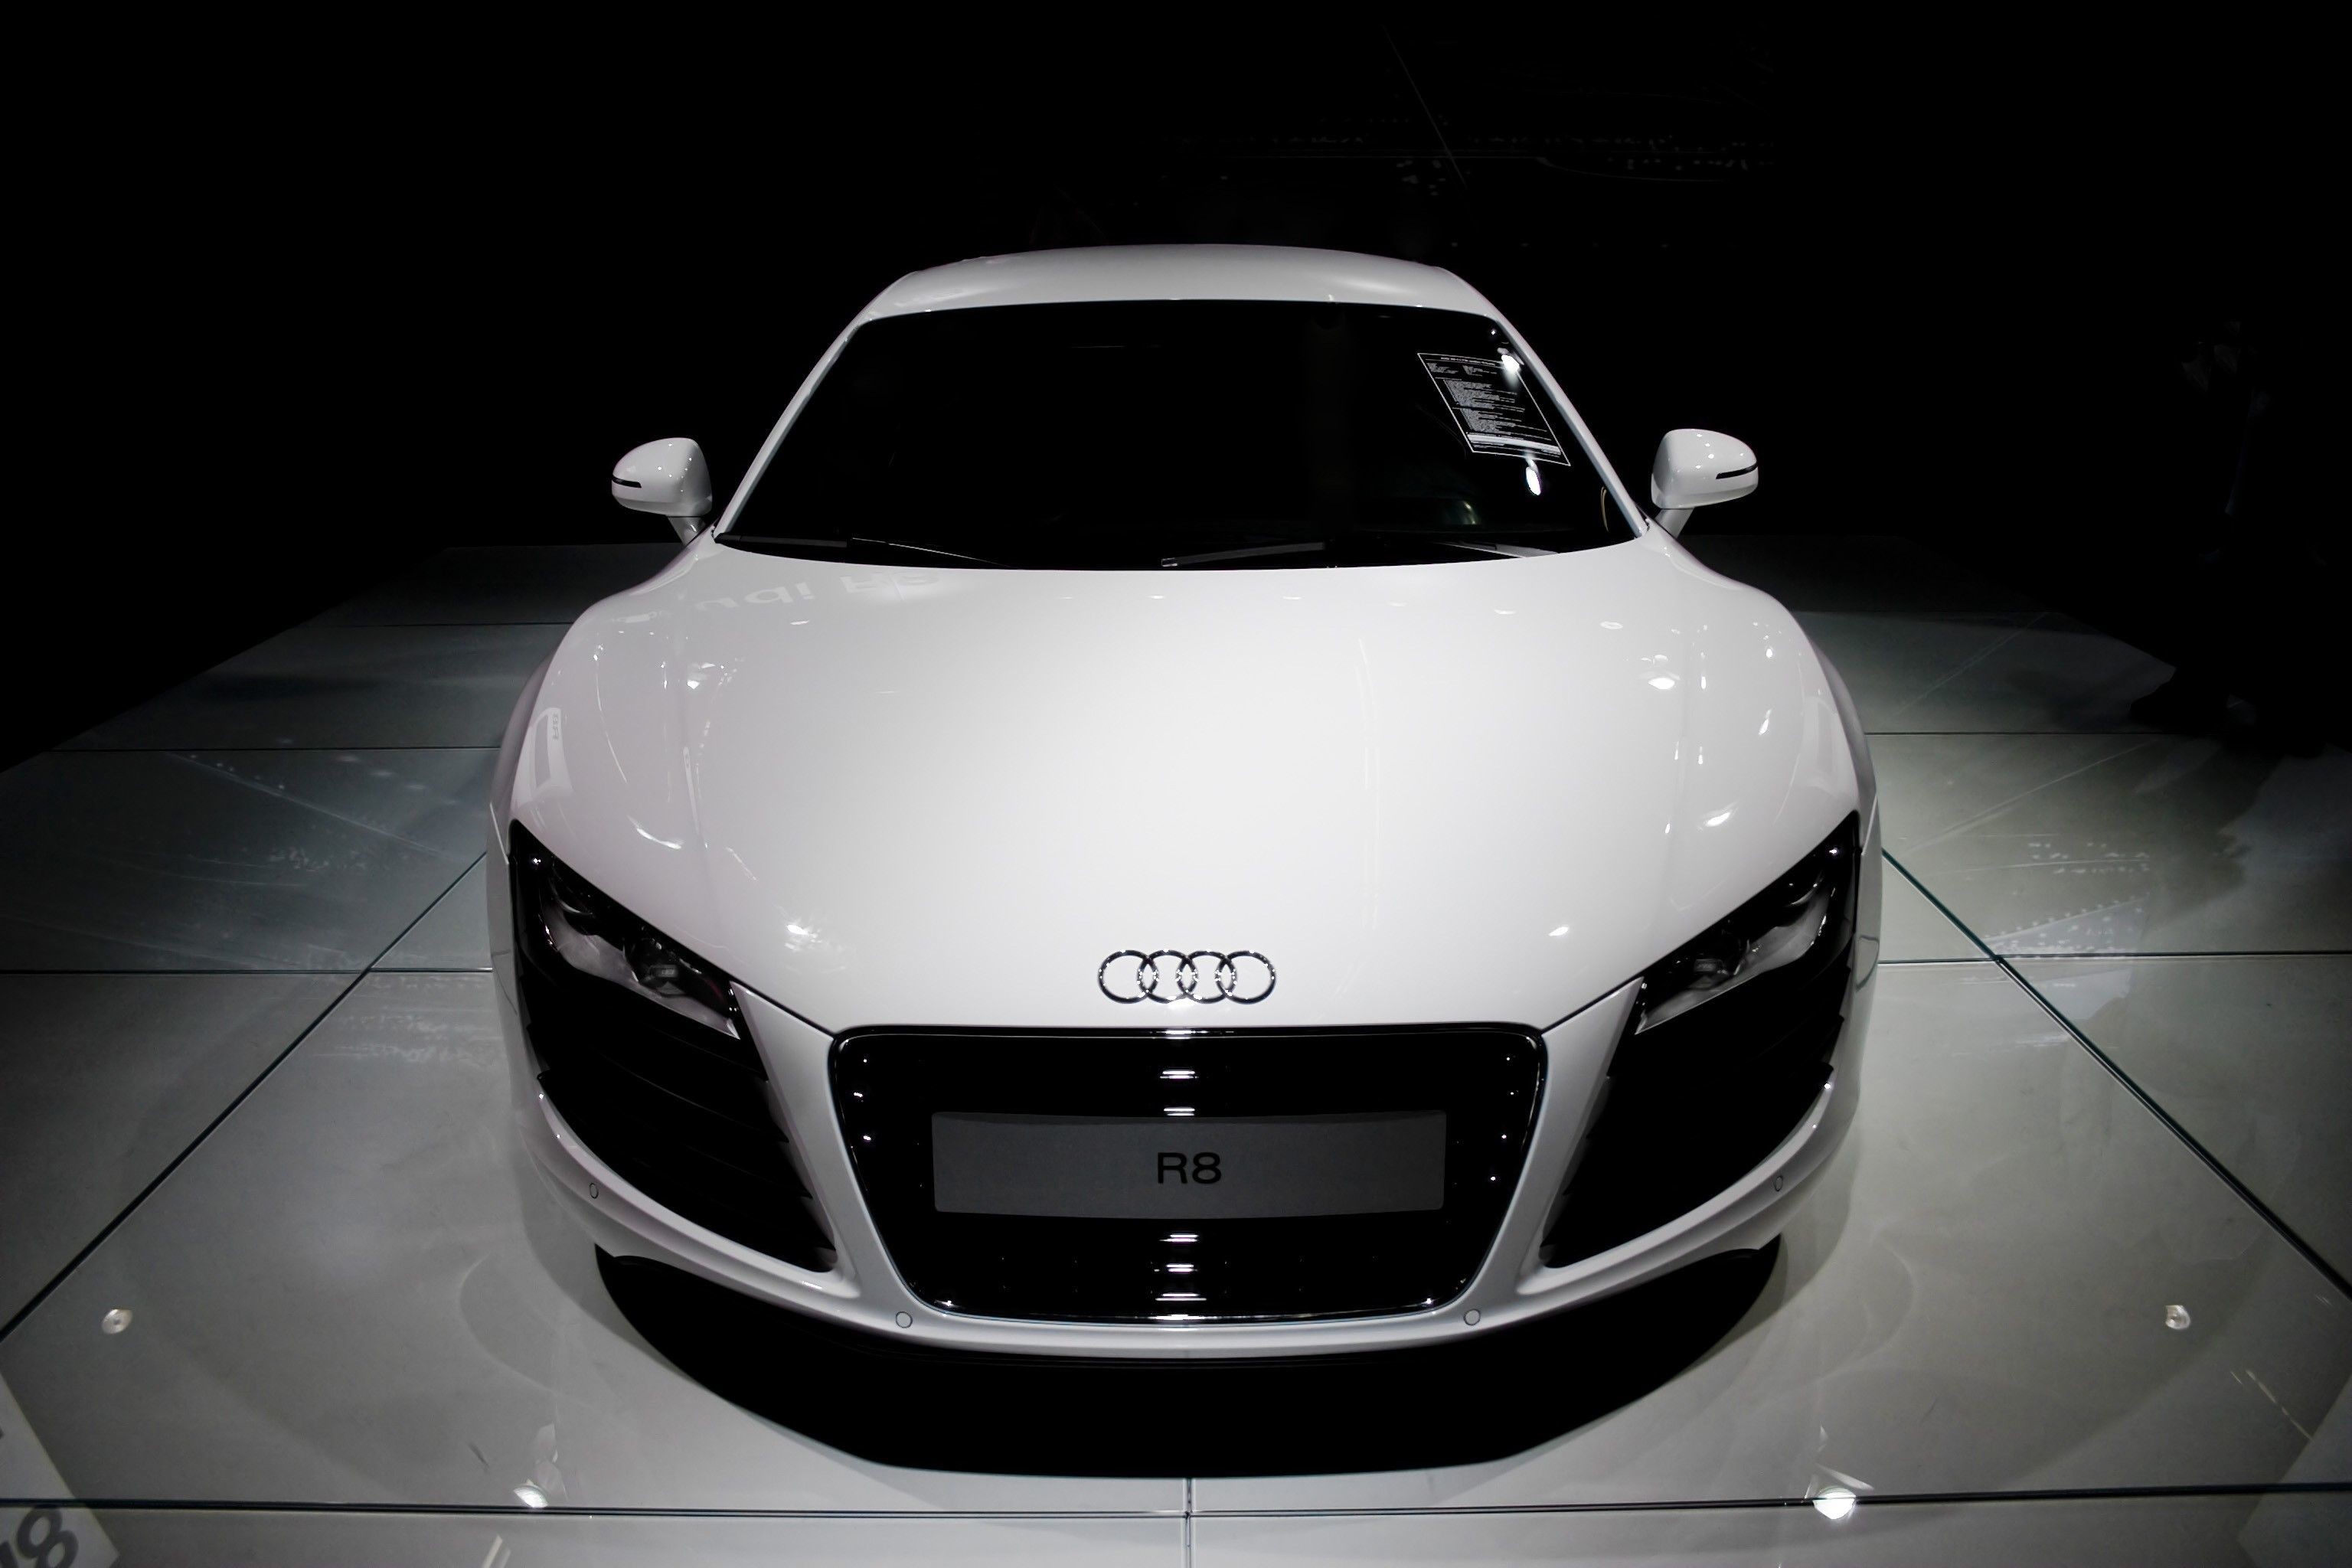 3072x2048 ... Download Audi R8 3 Car Wallpaper 1920x1200 Resolution Pictures .